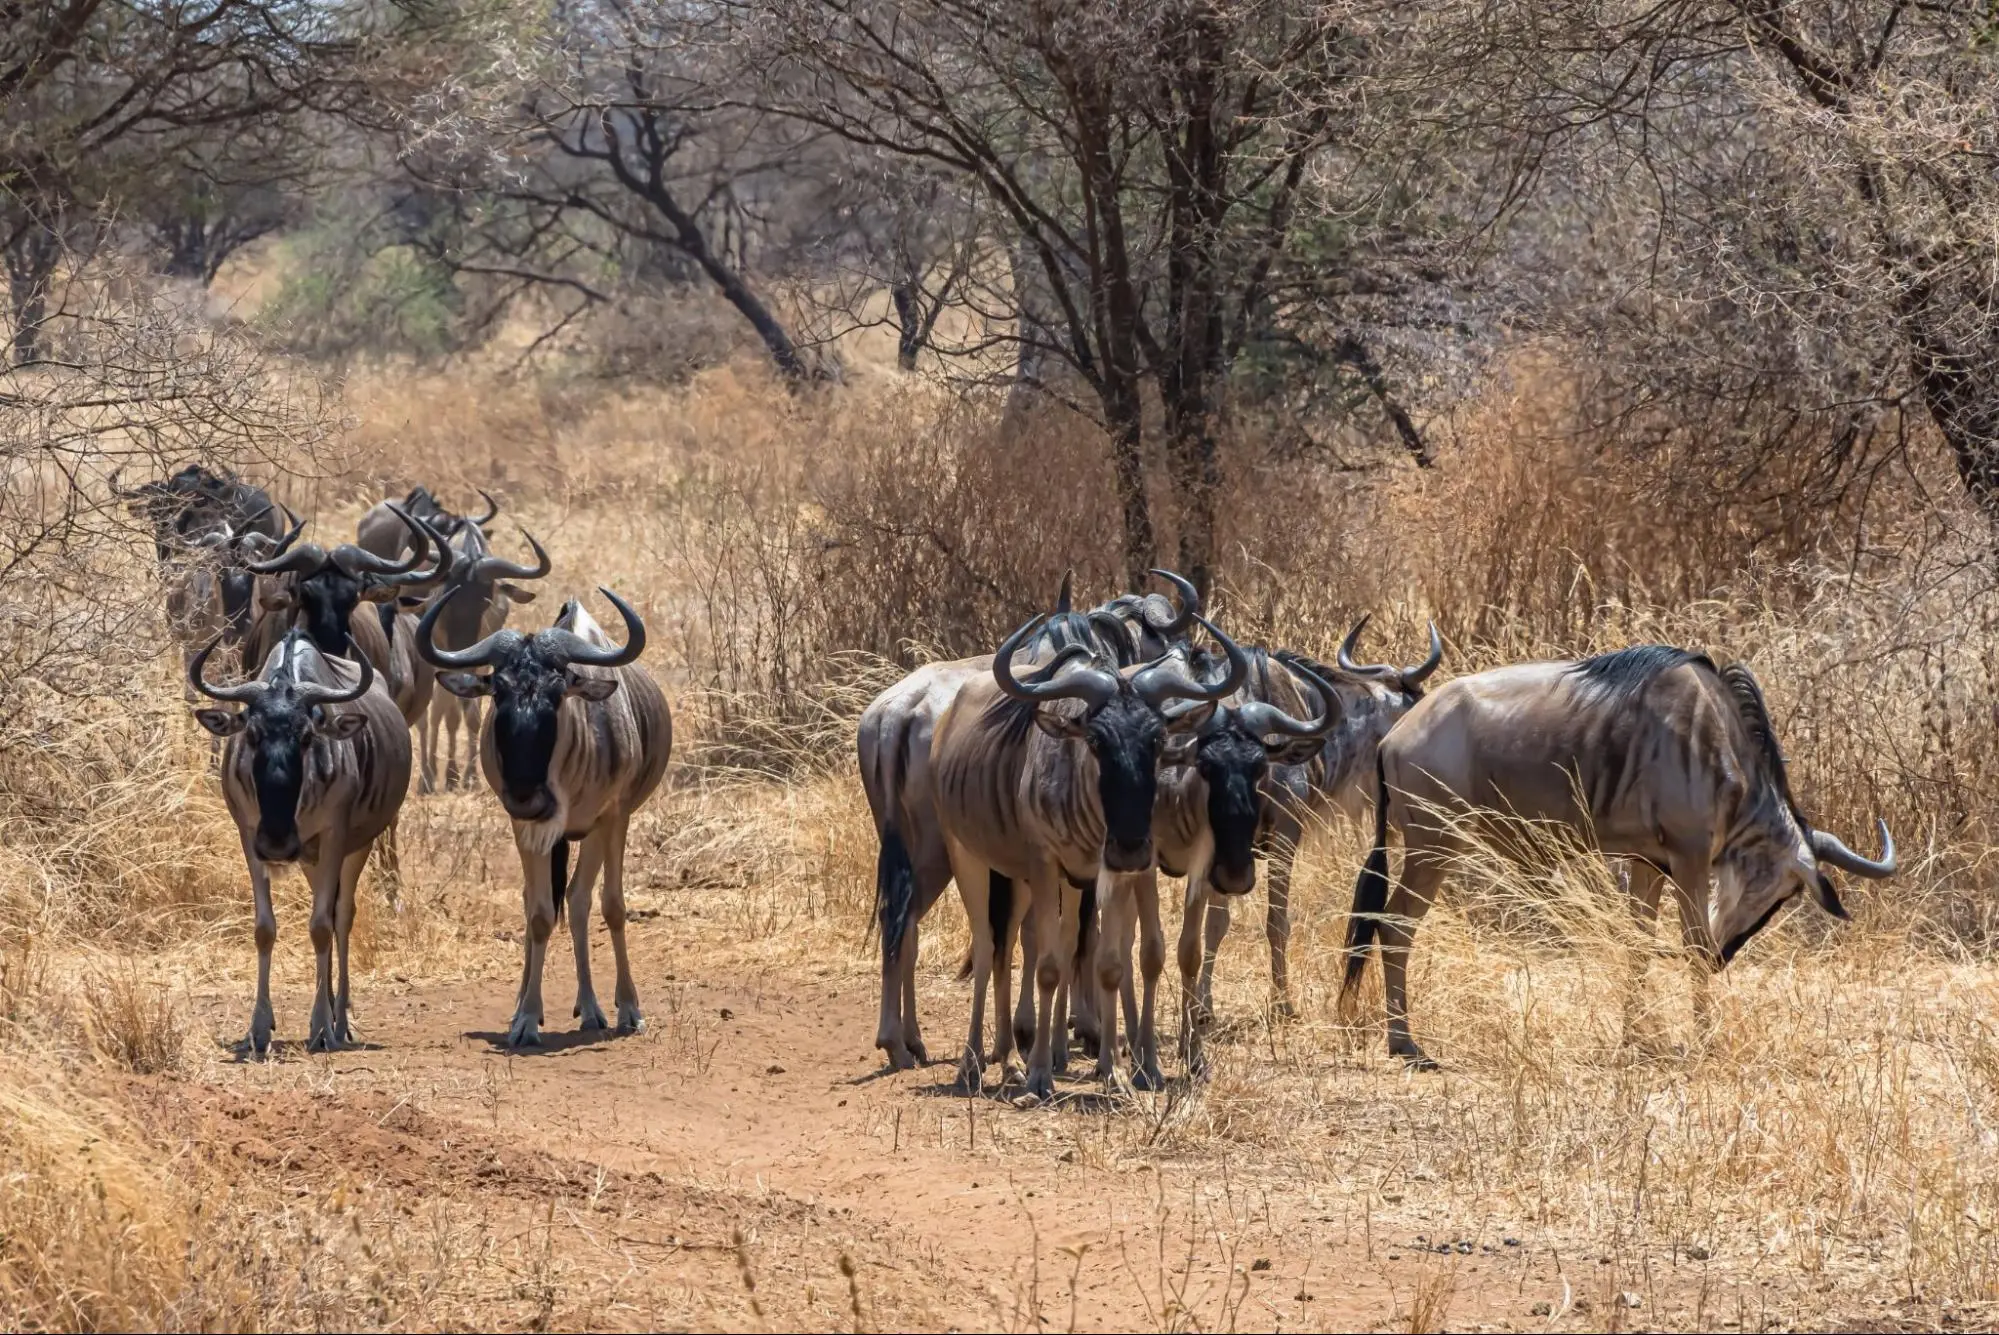 A procession of wildebeest on a dirt road, part of the remarkable Great Wildebeest Migration.